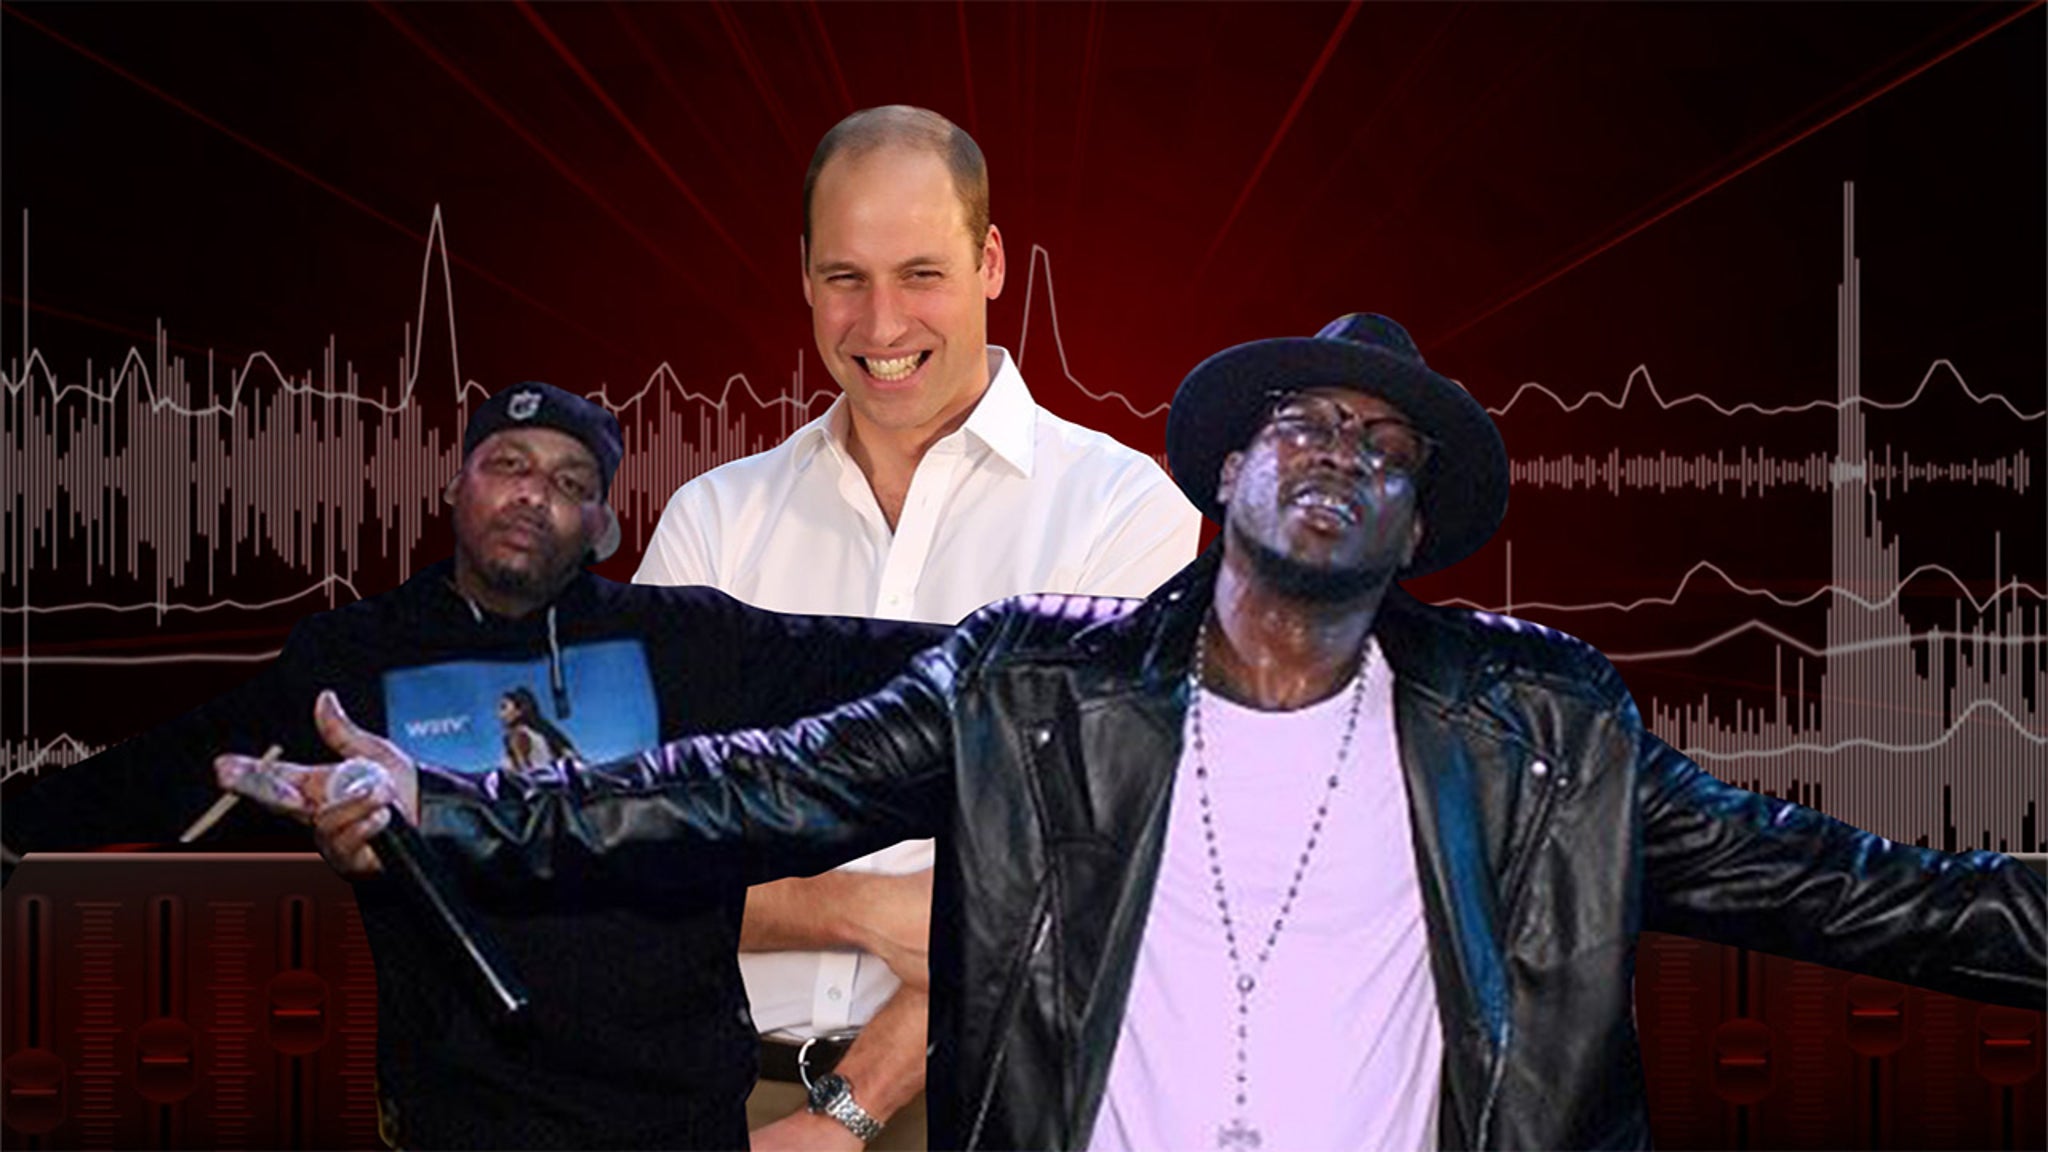 Prince William's Dance Moves Get Their Own Song, Courtesy Luniz